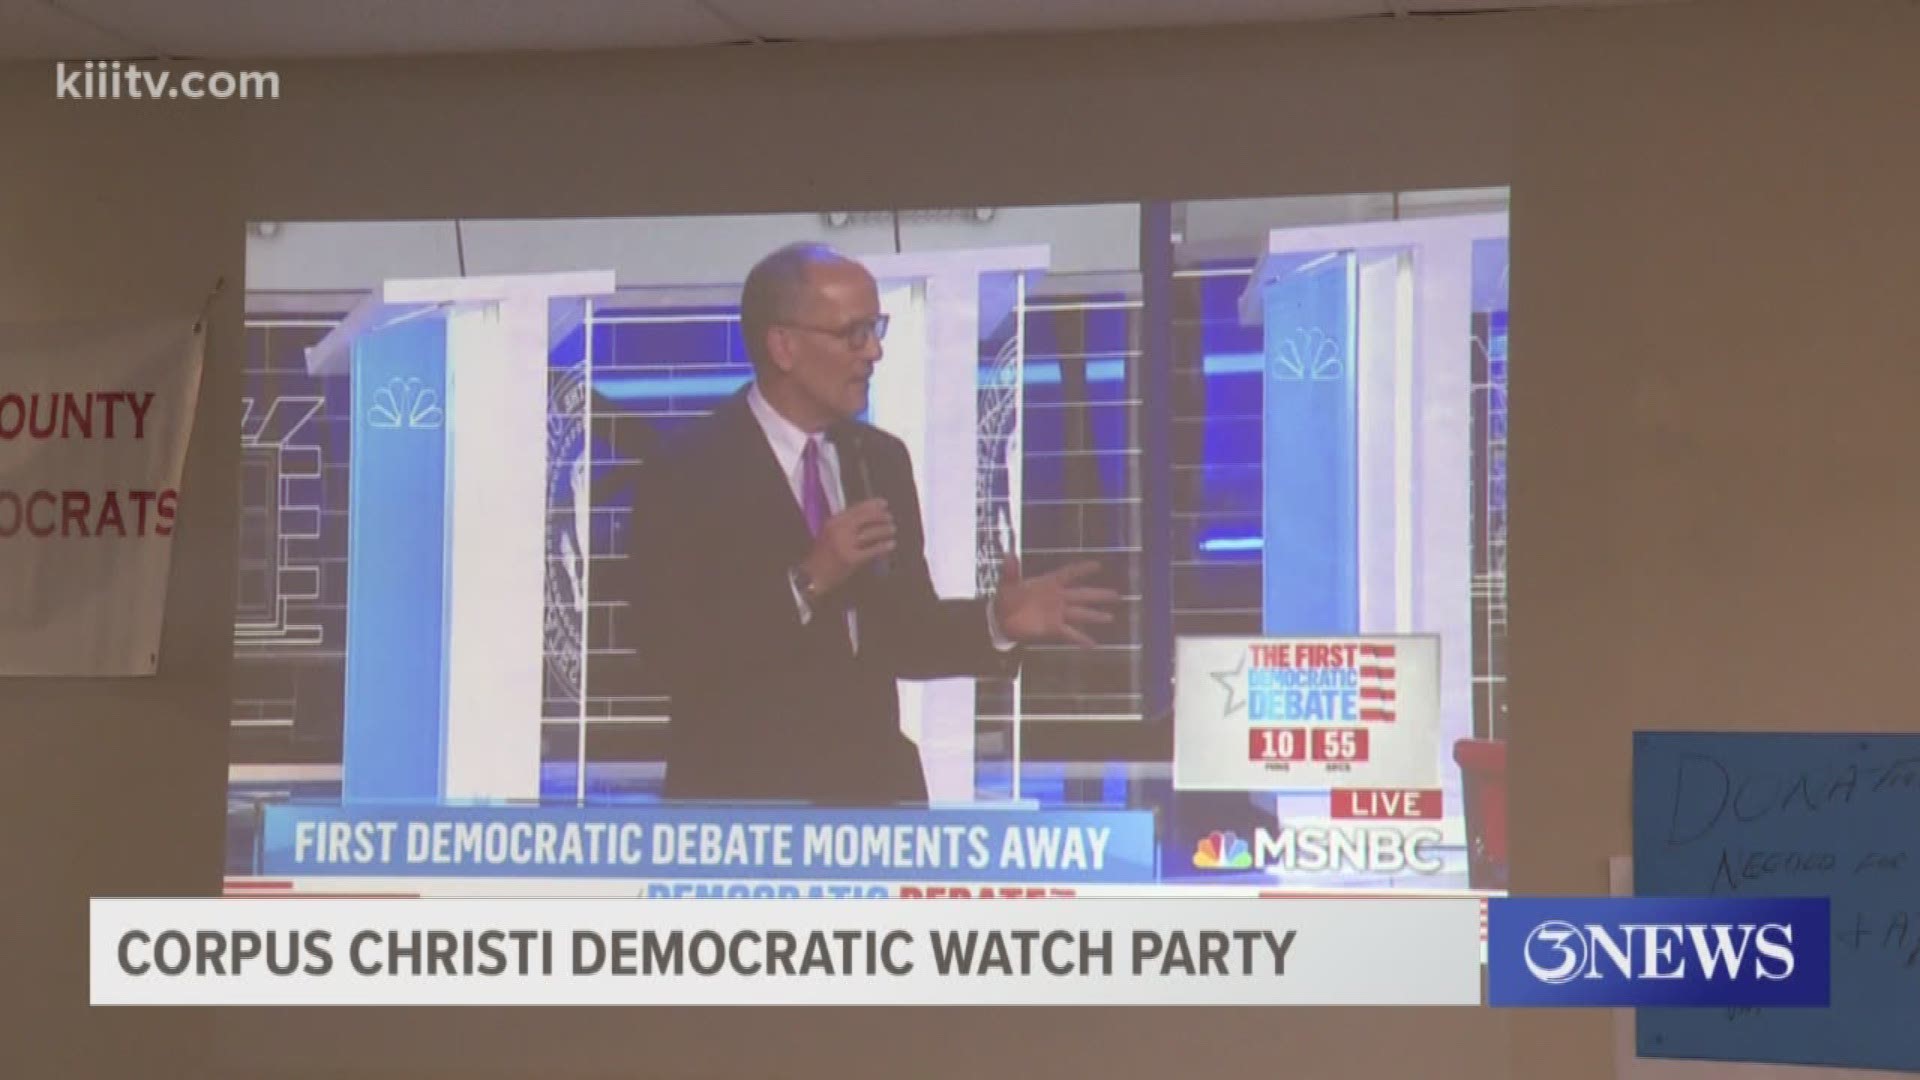 Three News reporter Michelle Pedraza was at the watch party for the first Democratic Presidential candidate debate on June 26th, 2019.